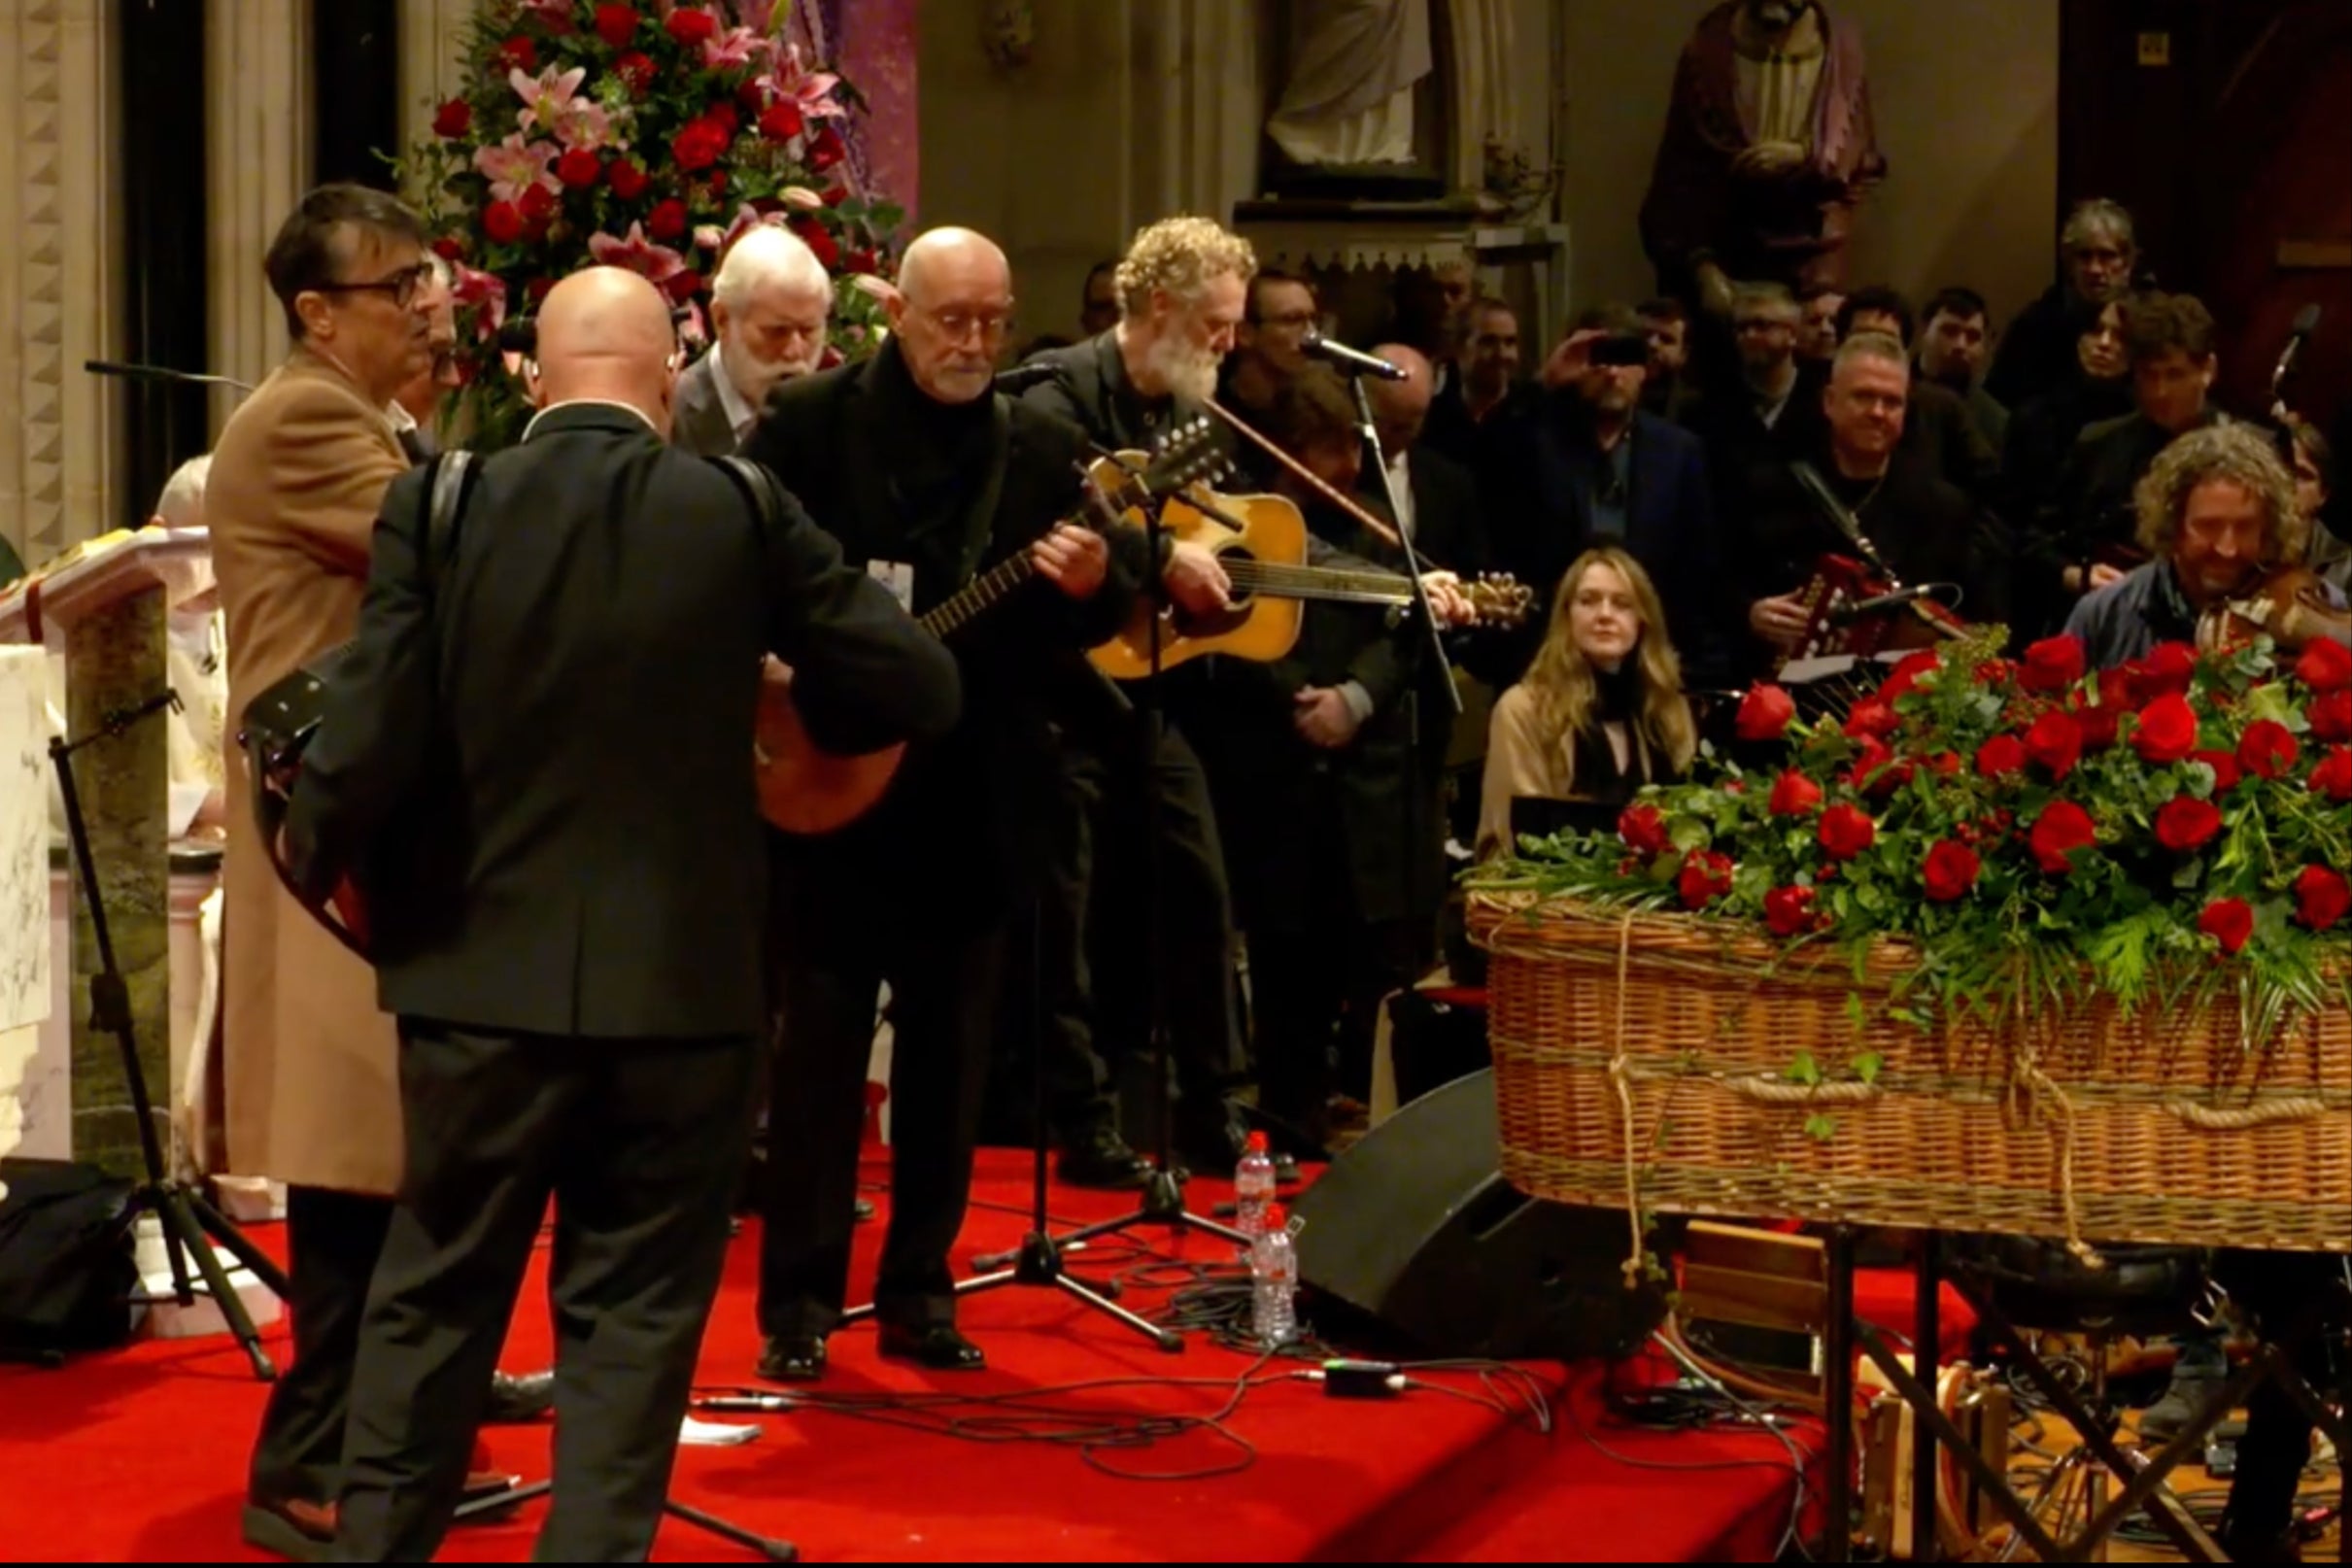 Mourners turned out to celebrate the Pogues singer’s life